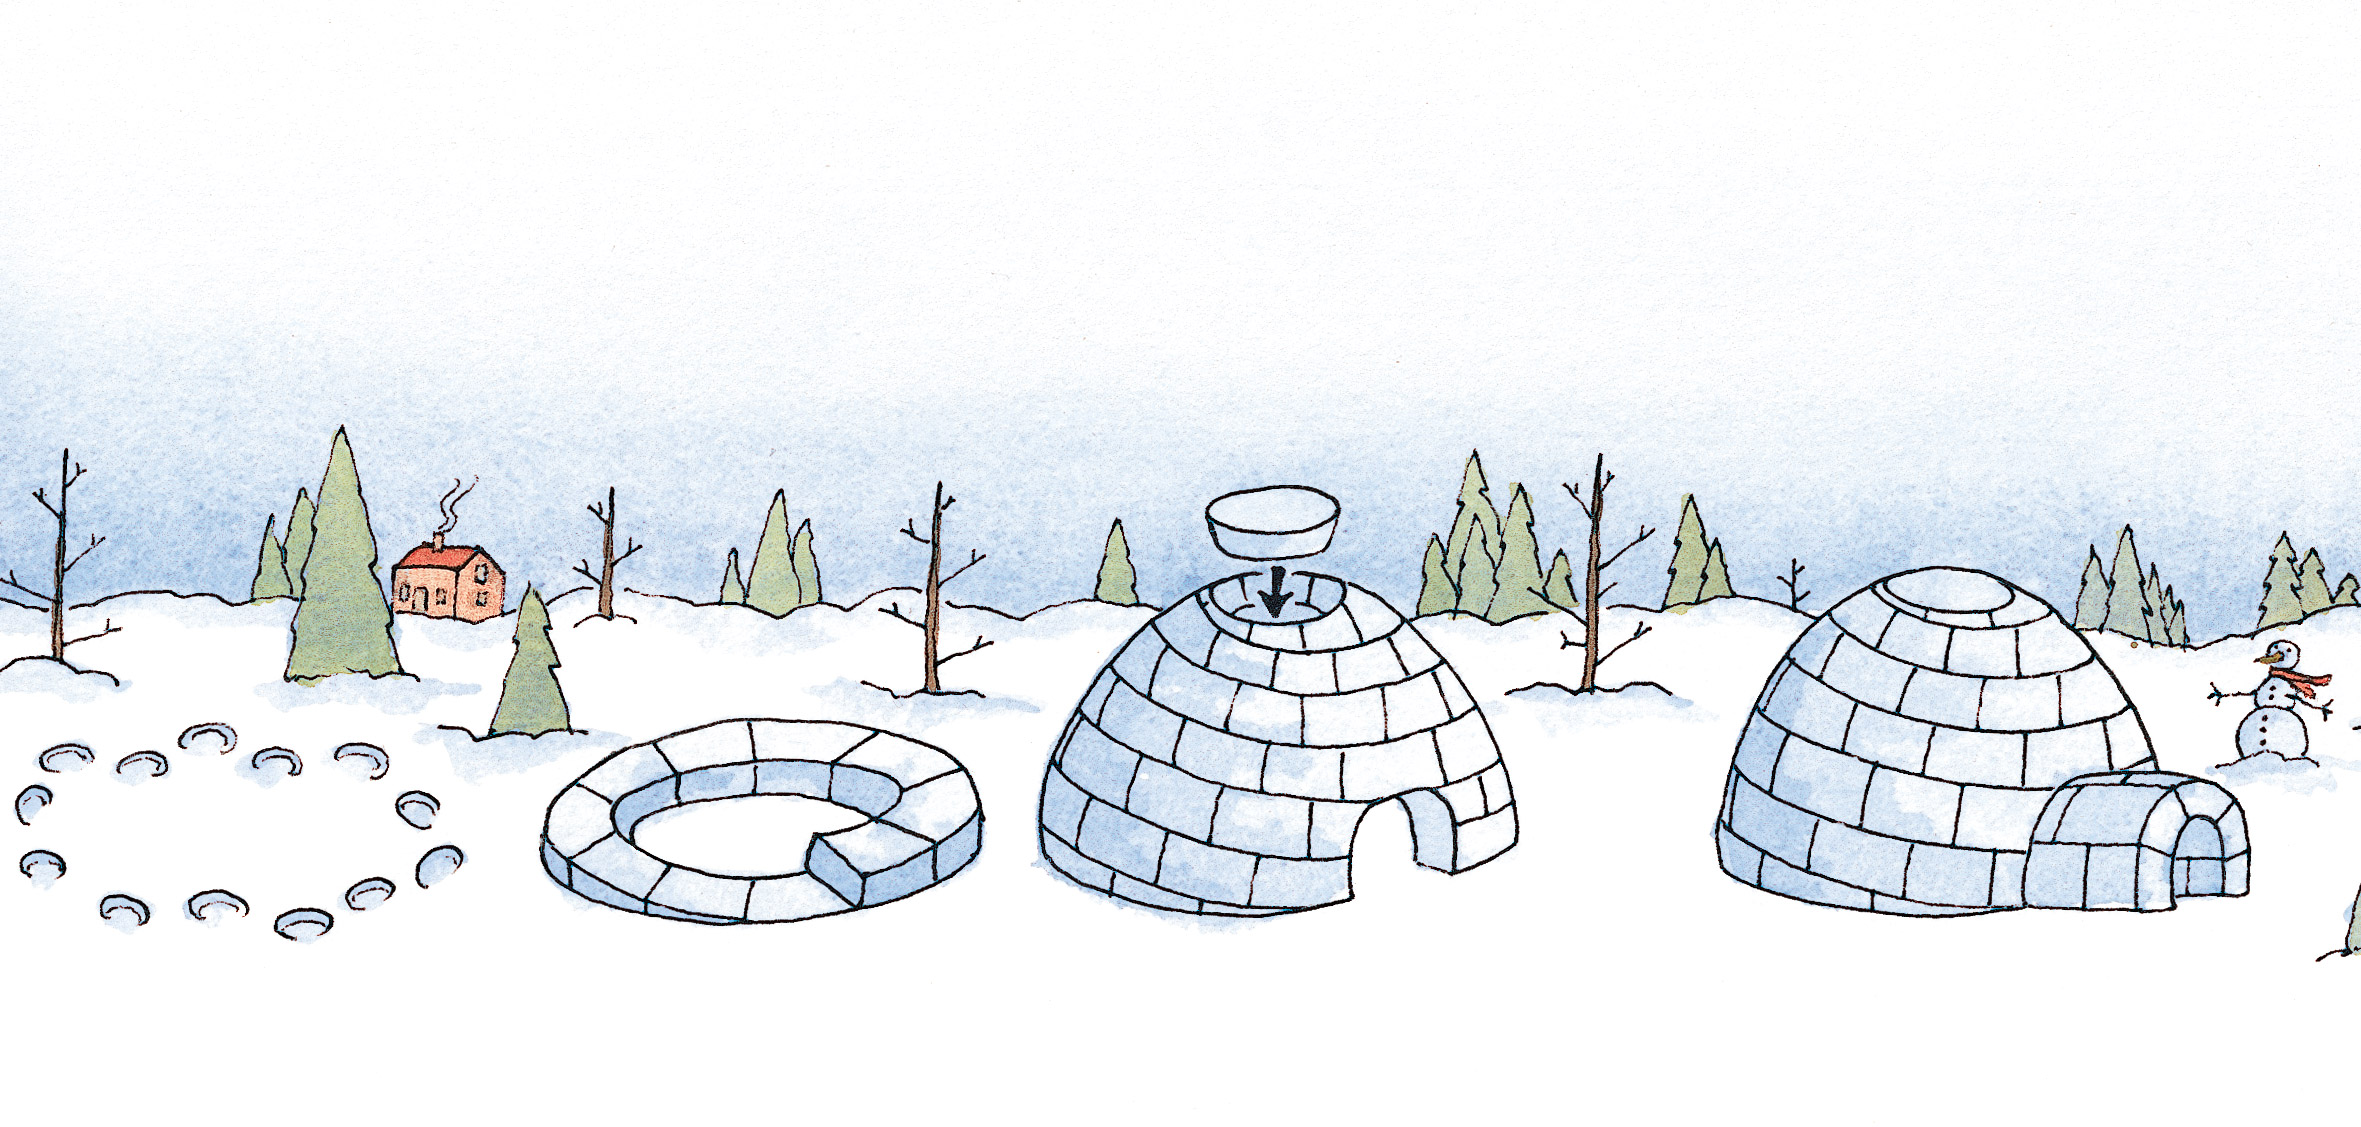 Everything You Need to Build an Igloo